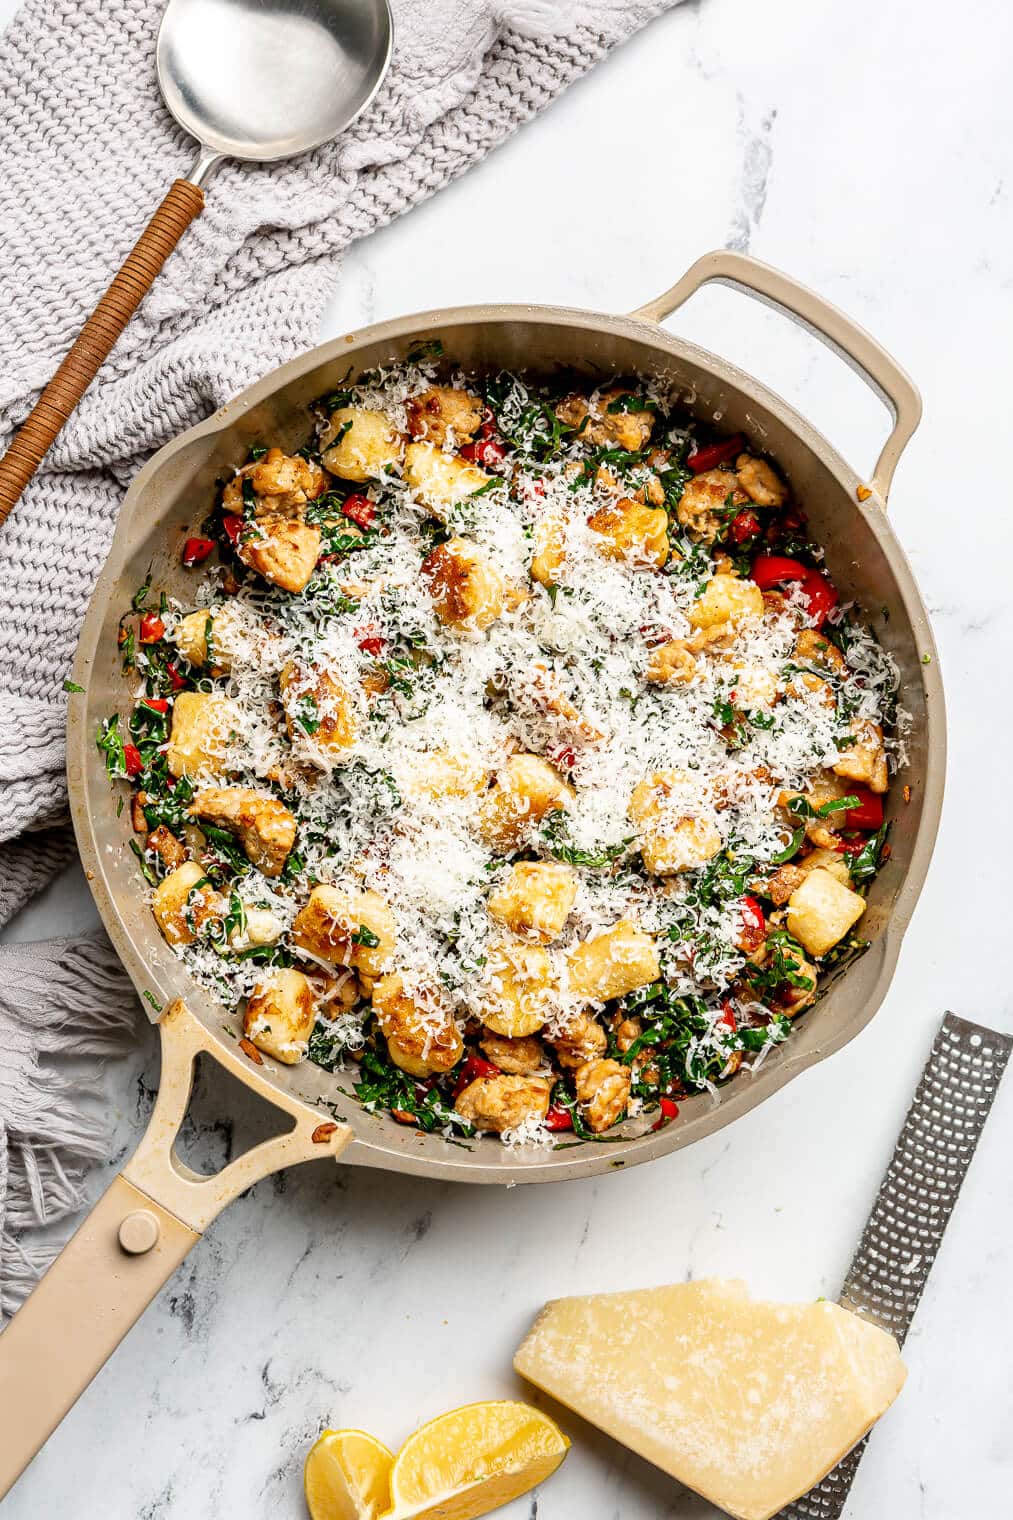 Top down view of a beige pan with gnocchi, sausage, and kale garnished with grated parmesan cheese. There's also a block of parmesan cheese and a microblade to the bottom right and a grey linen with a serving spoon to the top left.